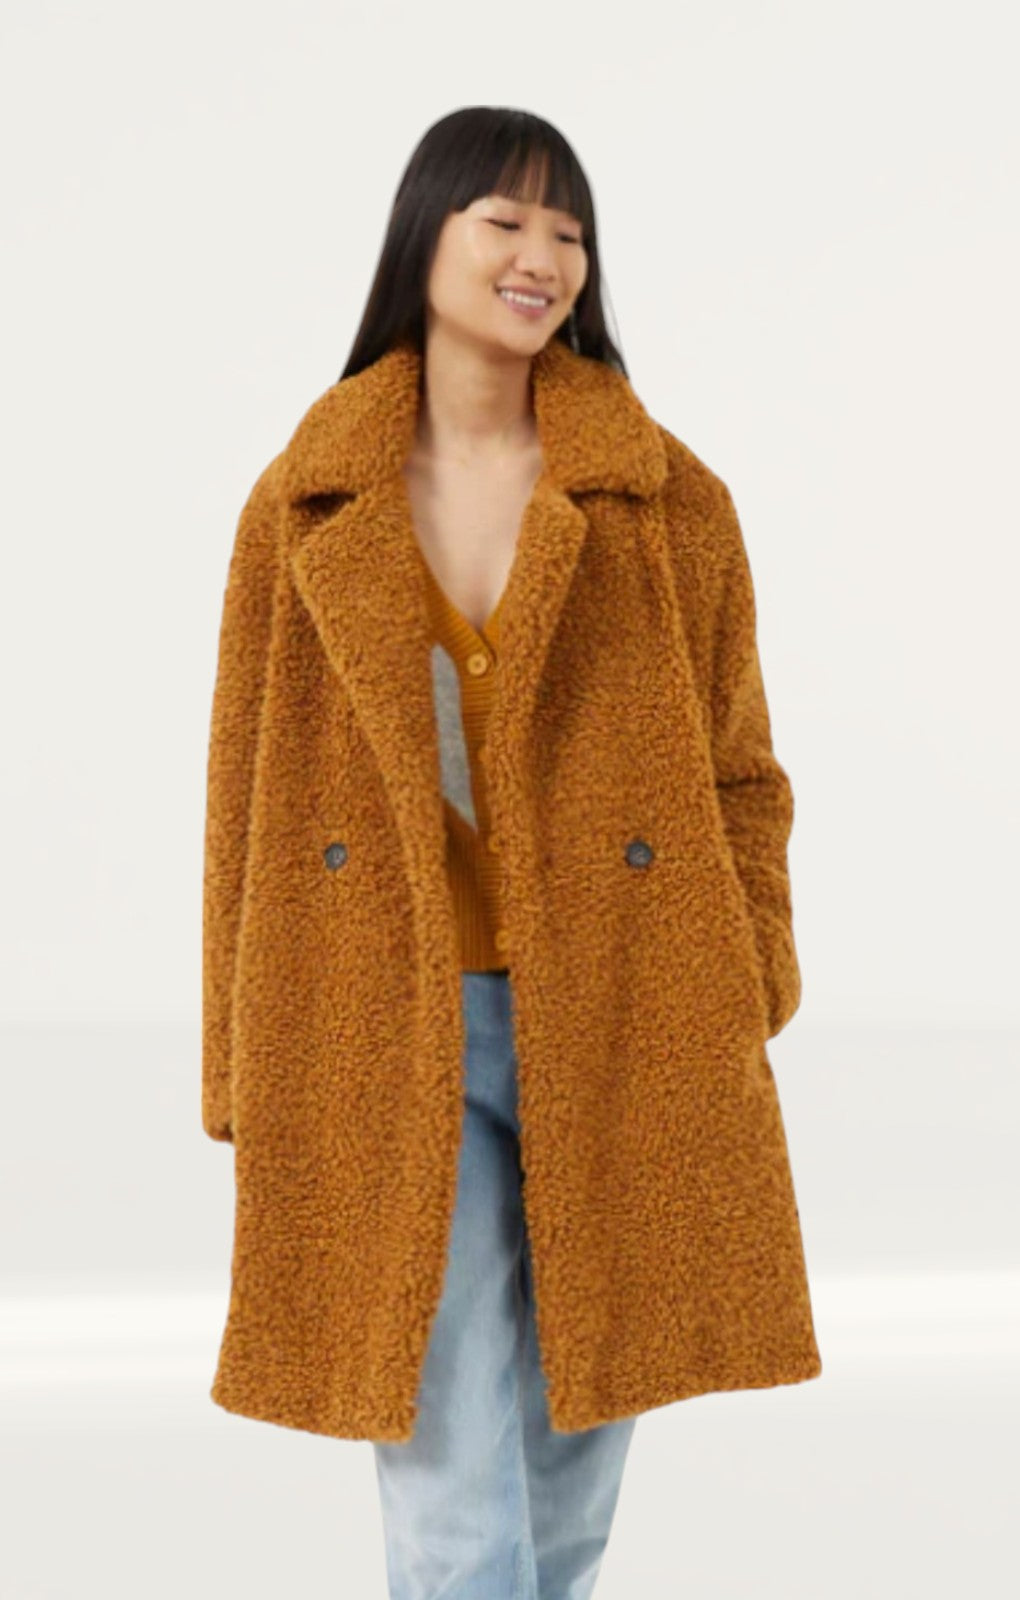 French Connection Callie Iren Borg Coat product image